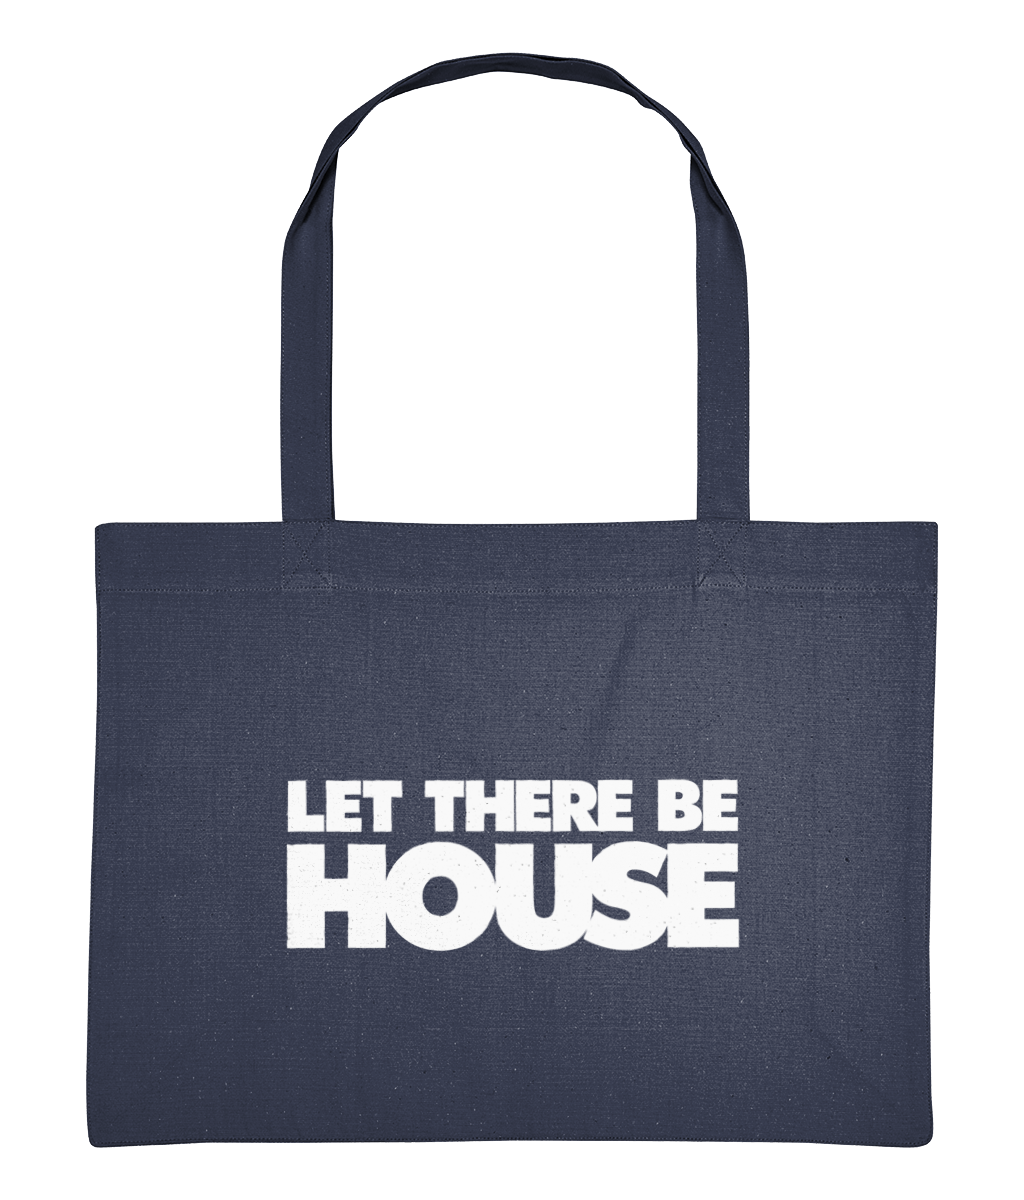 Shopping Bag Let There Be House